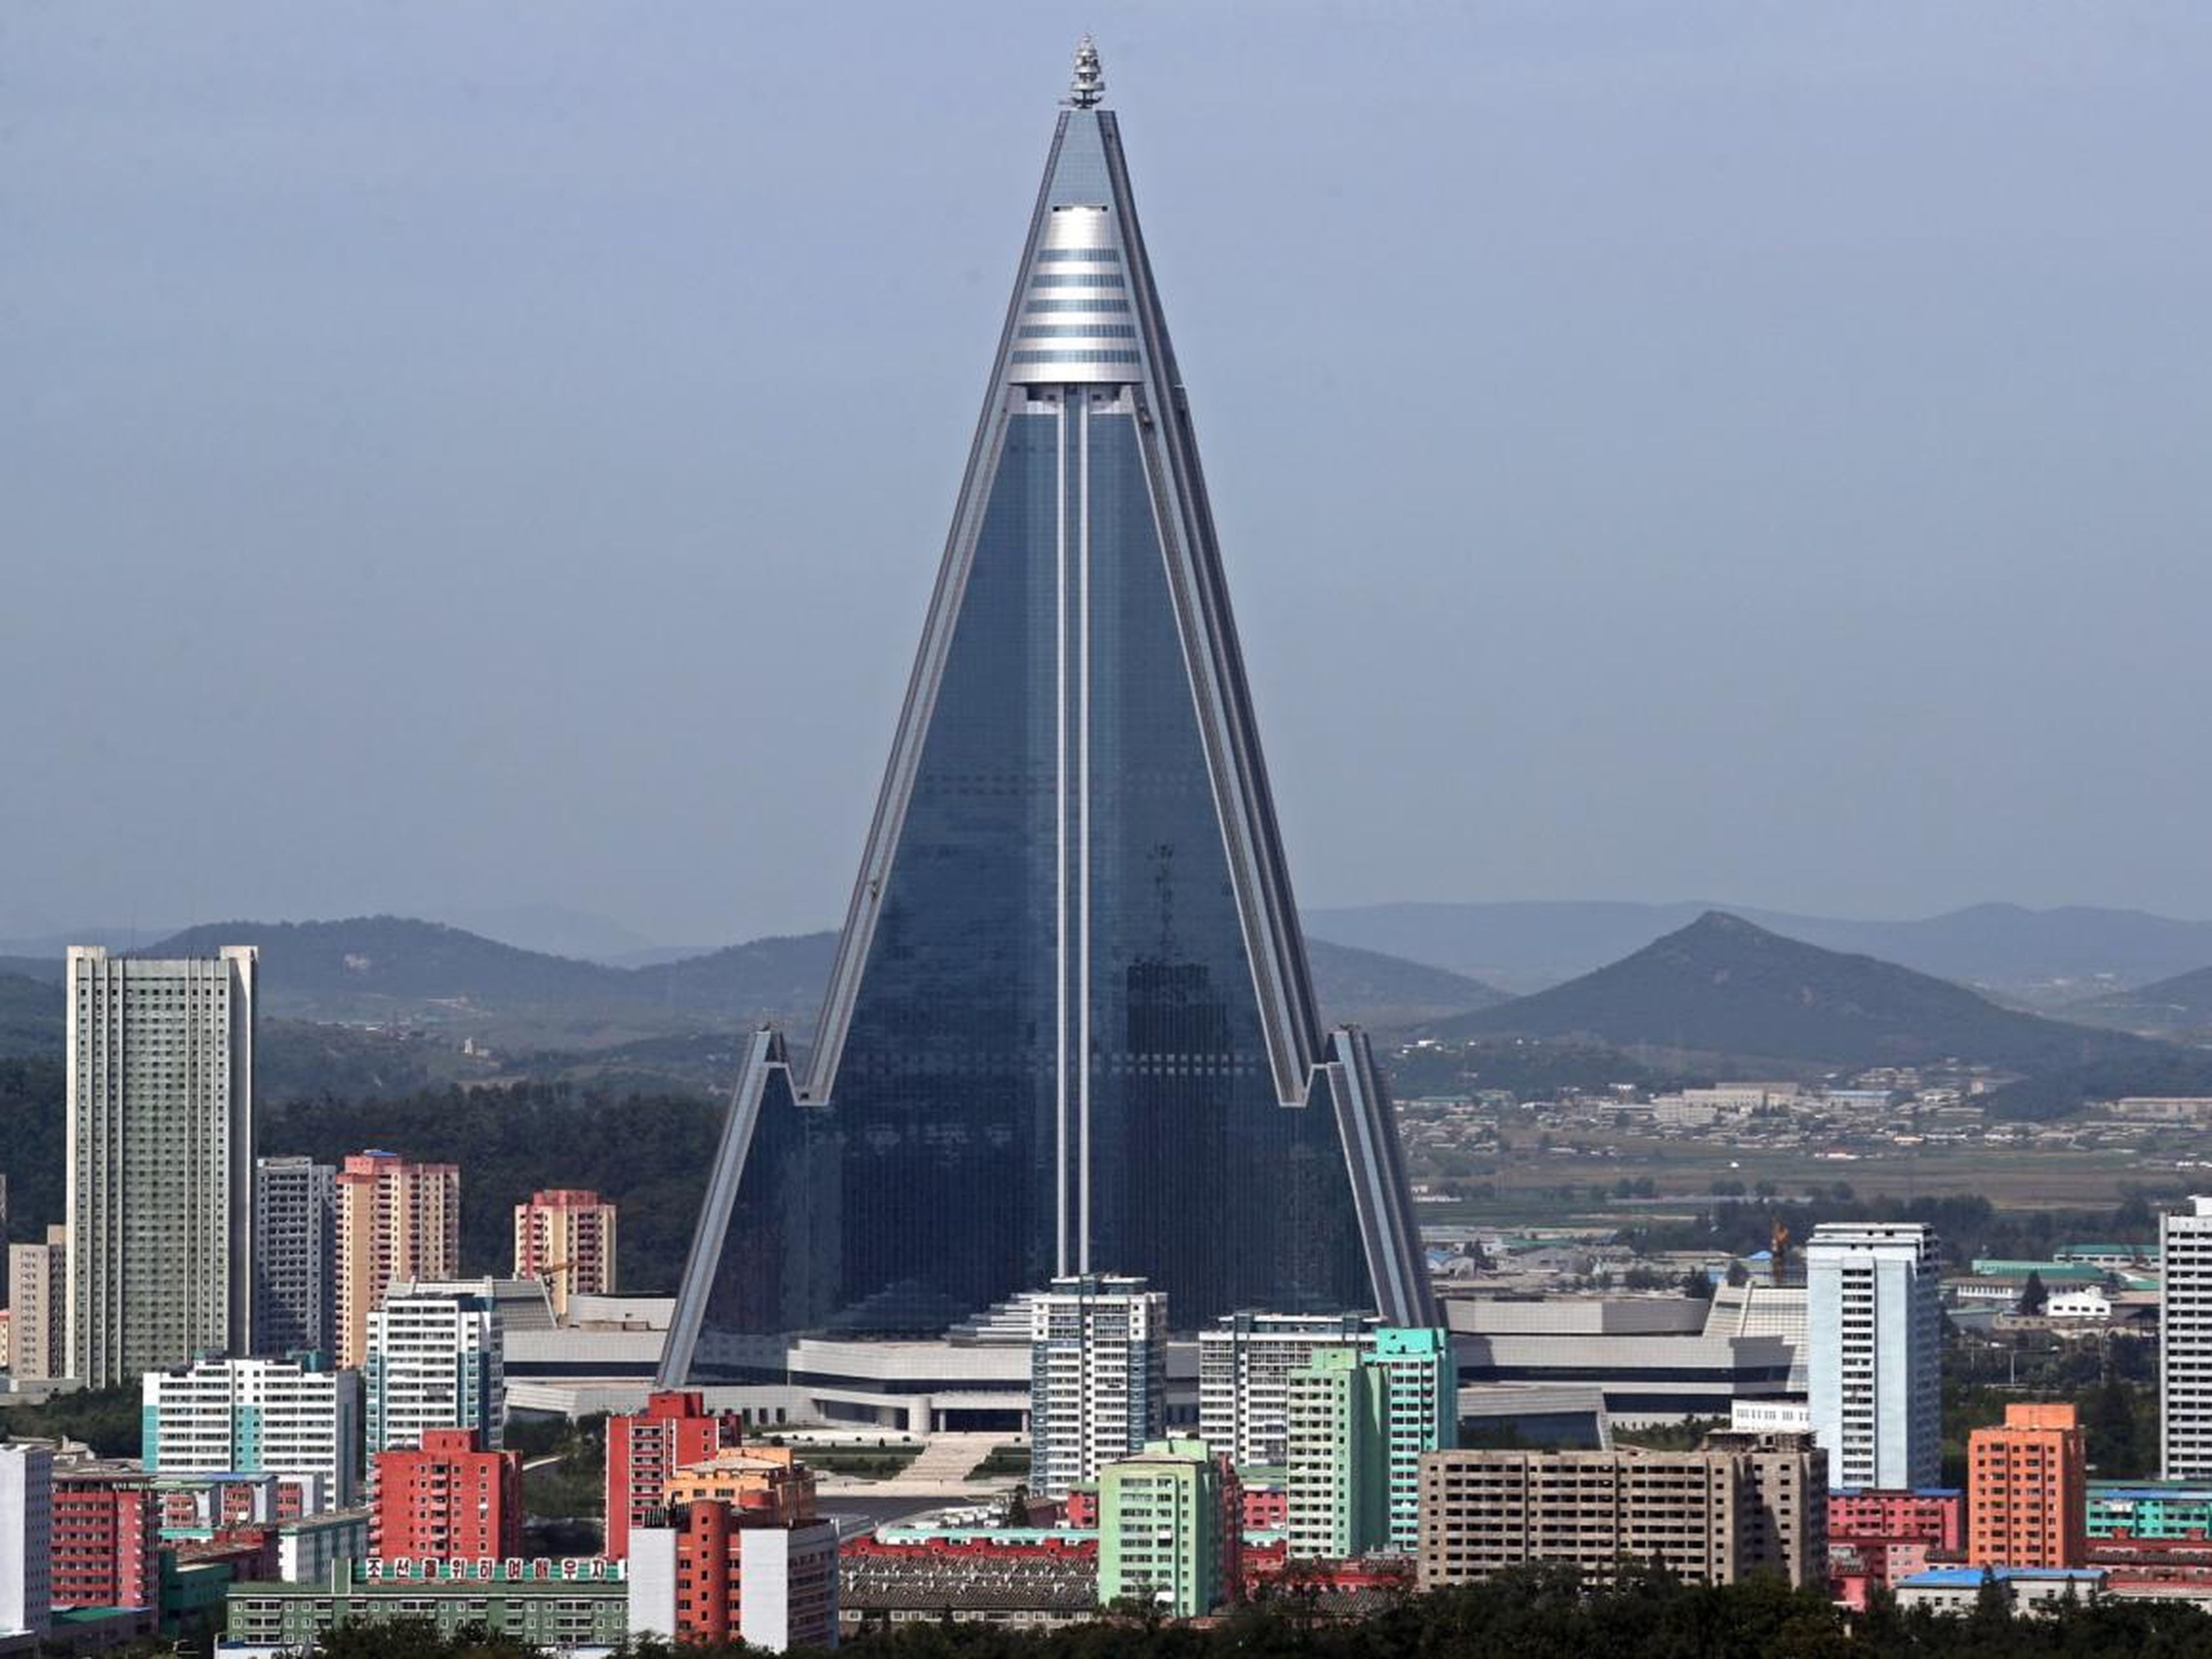 Ryugyong Hotel's exterior was completed in 2011.